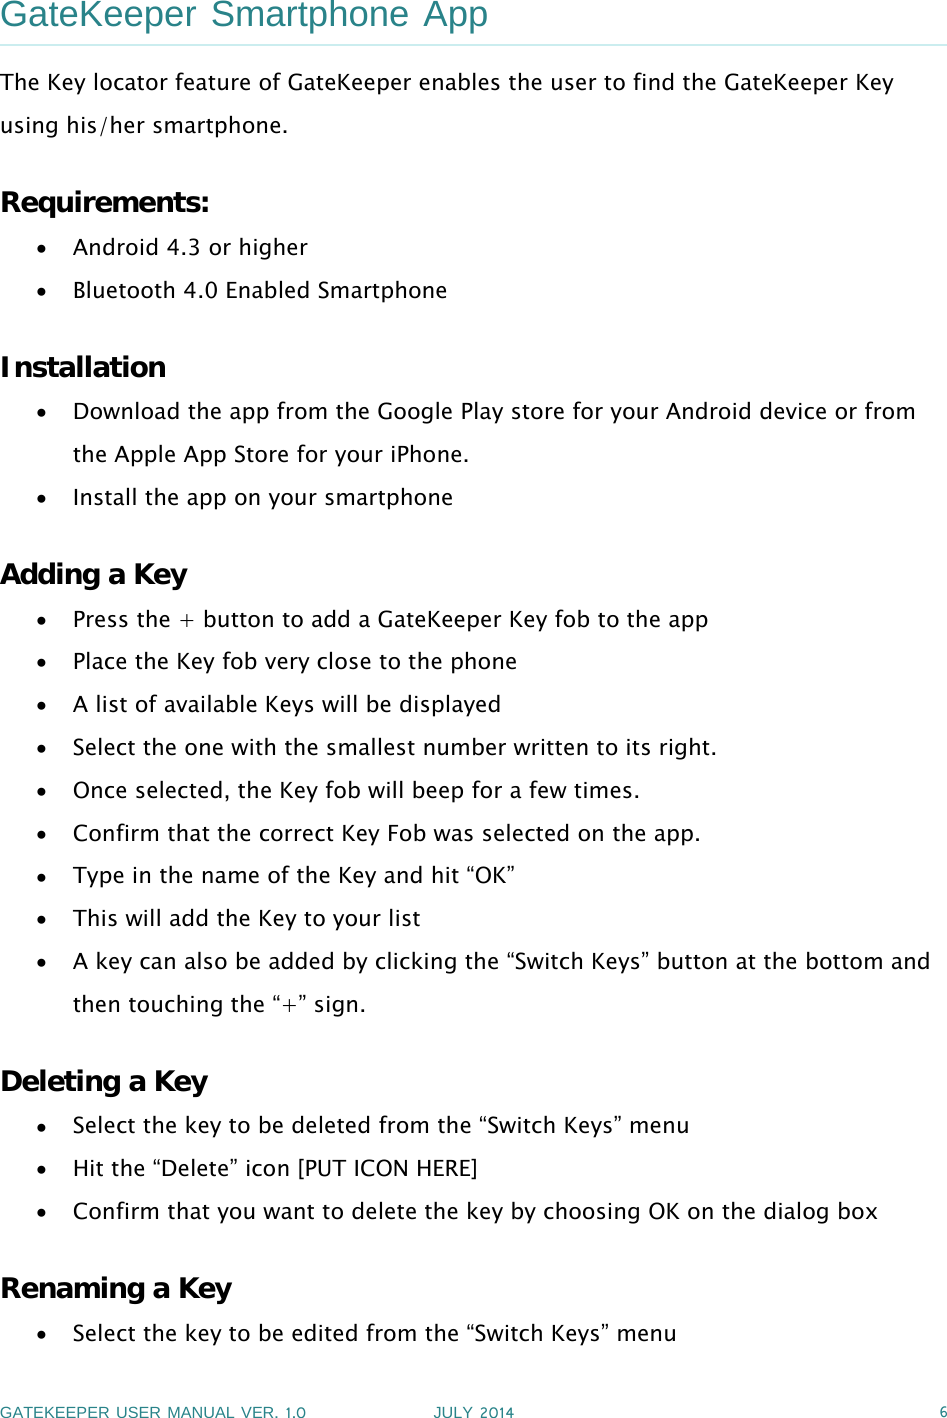 GATEKEEPER USER MANUAL VER.1.0 JULY 2014 6GateKeeper Smartphone AppThe Key locator feature of GateKeeper enables the user to find the GateKeeper Keyusing his/her smartphone.Requirements:Android 4.3 or higherBluetooth 4.0 Enabled SmartphoneInstallationDownload the app from the Google Play store for your Android device or fromthe Apple App Store for your iPhone.Install the app on your smartphoneAdding a KeyPress the + button to add a GateKeeper Key fob to the appPlace the Key fob very close to the phoneA list of available Keys will be displayedSelect the one with the smallest number written to its right.Once selected, the Key fob will beep for a few times.Confirm that the correct Key Fob was selected on the app.Type in the name of the Key and hit “OK”This will add the Key to your listA key can also be added by clicking the “Switch Keys” button at the bottom andthen touching the “+” sign.Deleting a KeySelect the key to be deleted from the “Switch Keys” menuHit the “Delete” icon [PUT ICON HERE]Confirm that you want to delete the key by choosing OK on the dialog boxRenaming a KeySelect the key to be edited from the “Switch Keys” menu